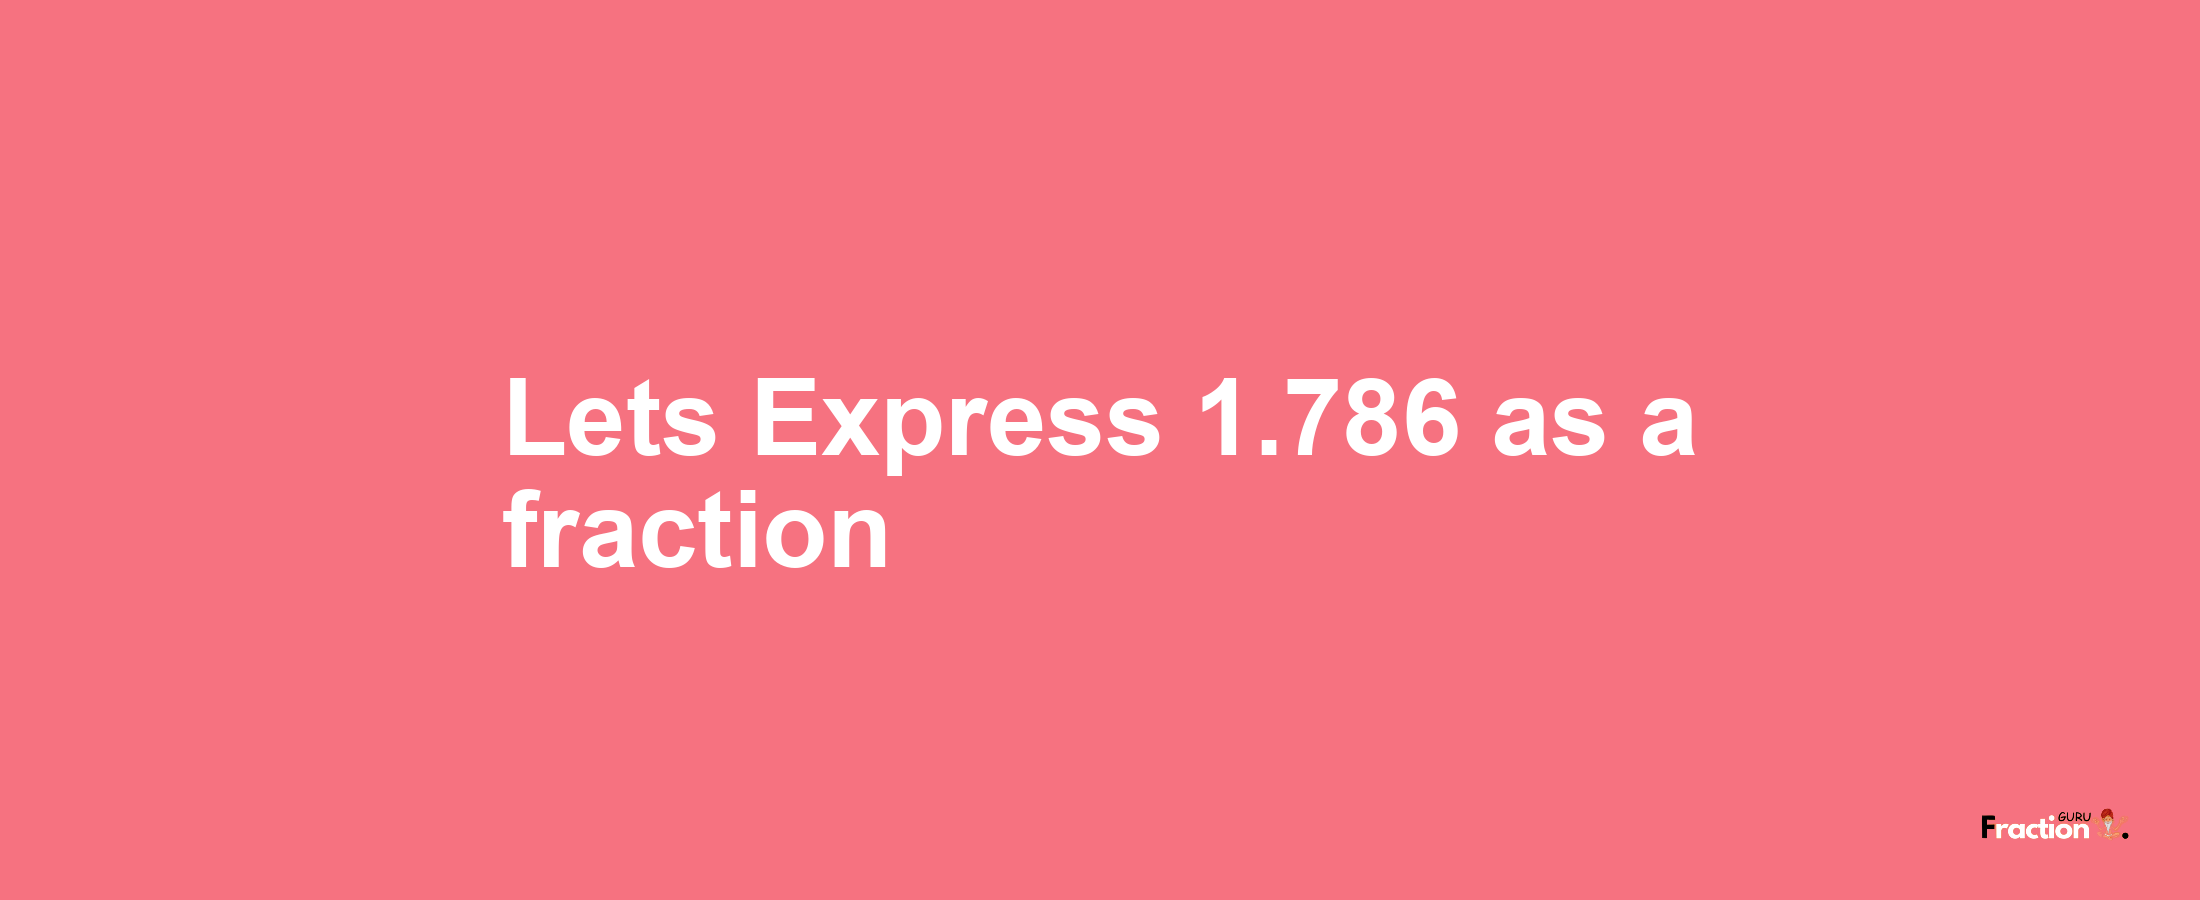 Lets Express 1.786 as afraction